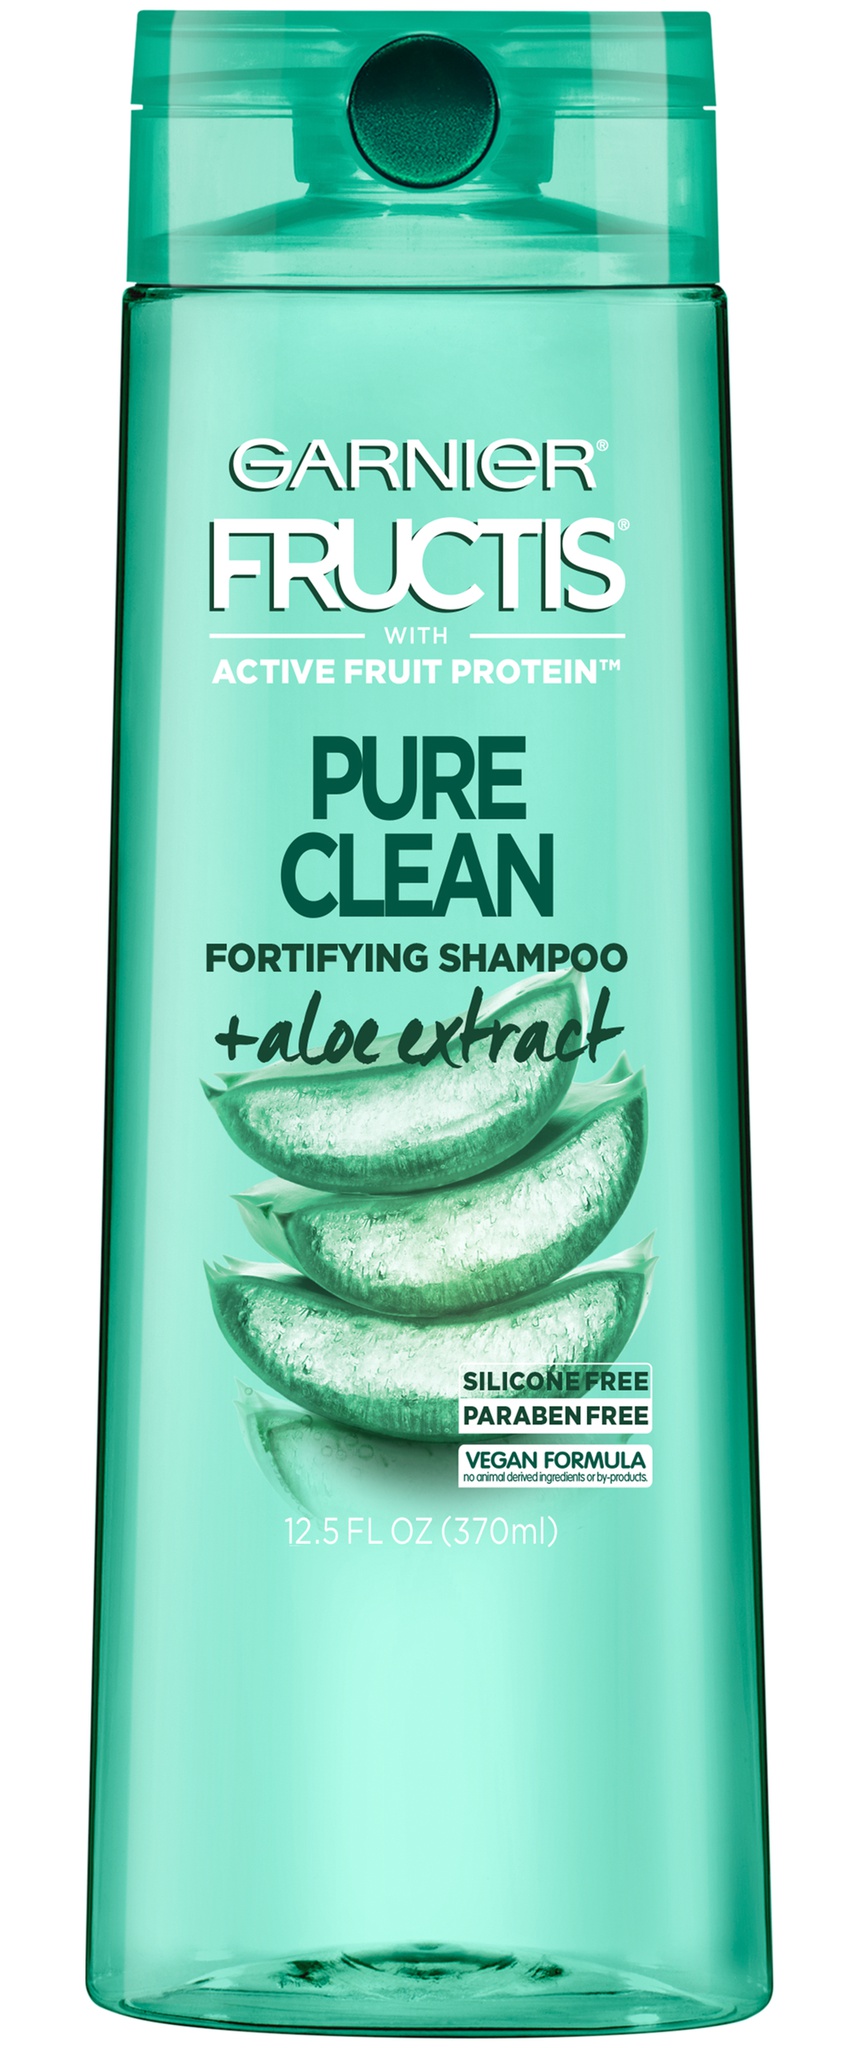 Garnier Fructis Pure Clean Shampoo Fortifying Silicone Free Shampoo With Aloe Extract